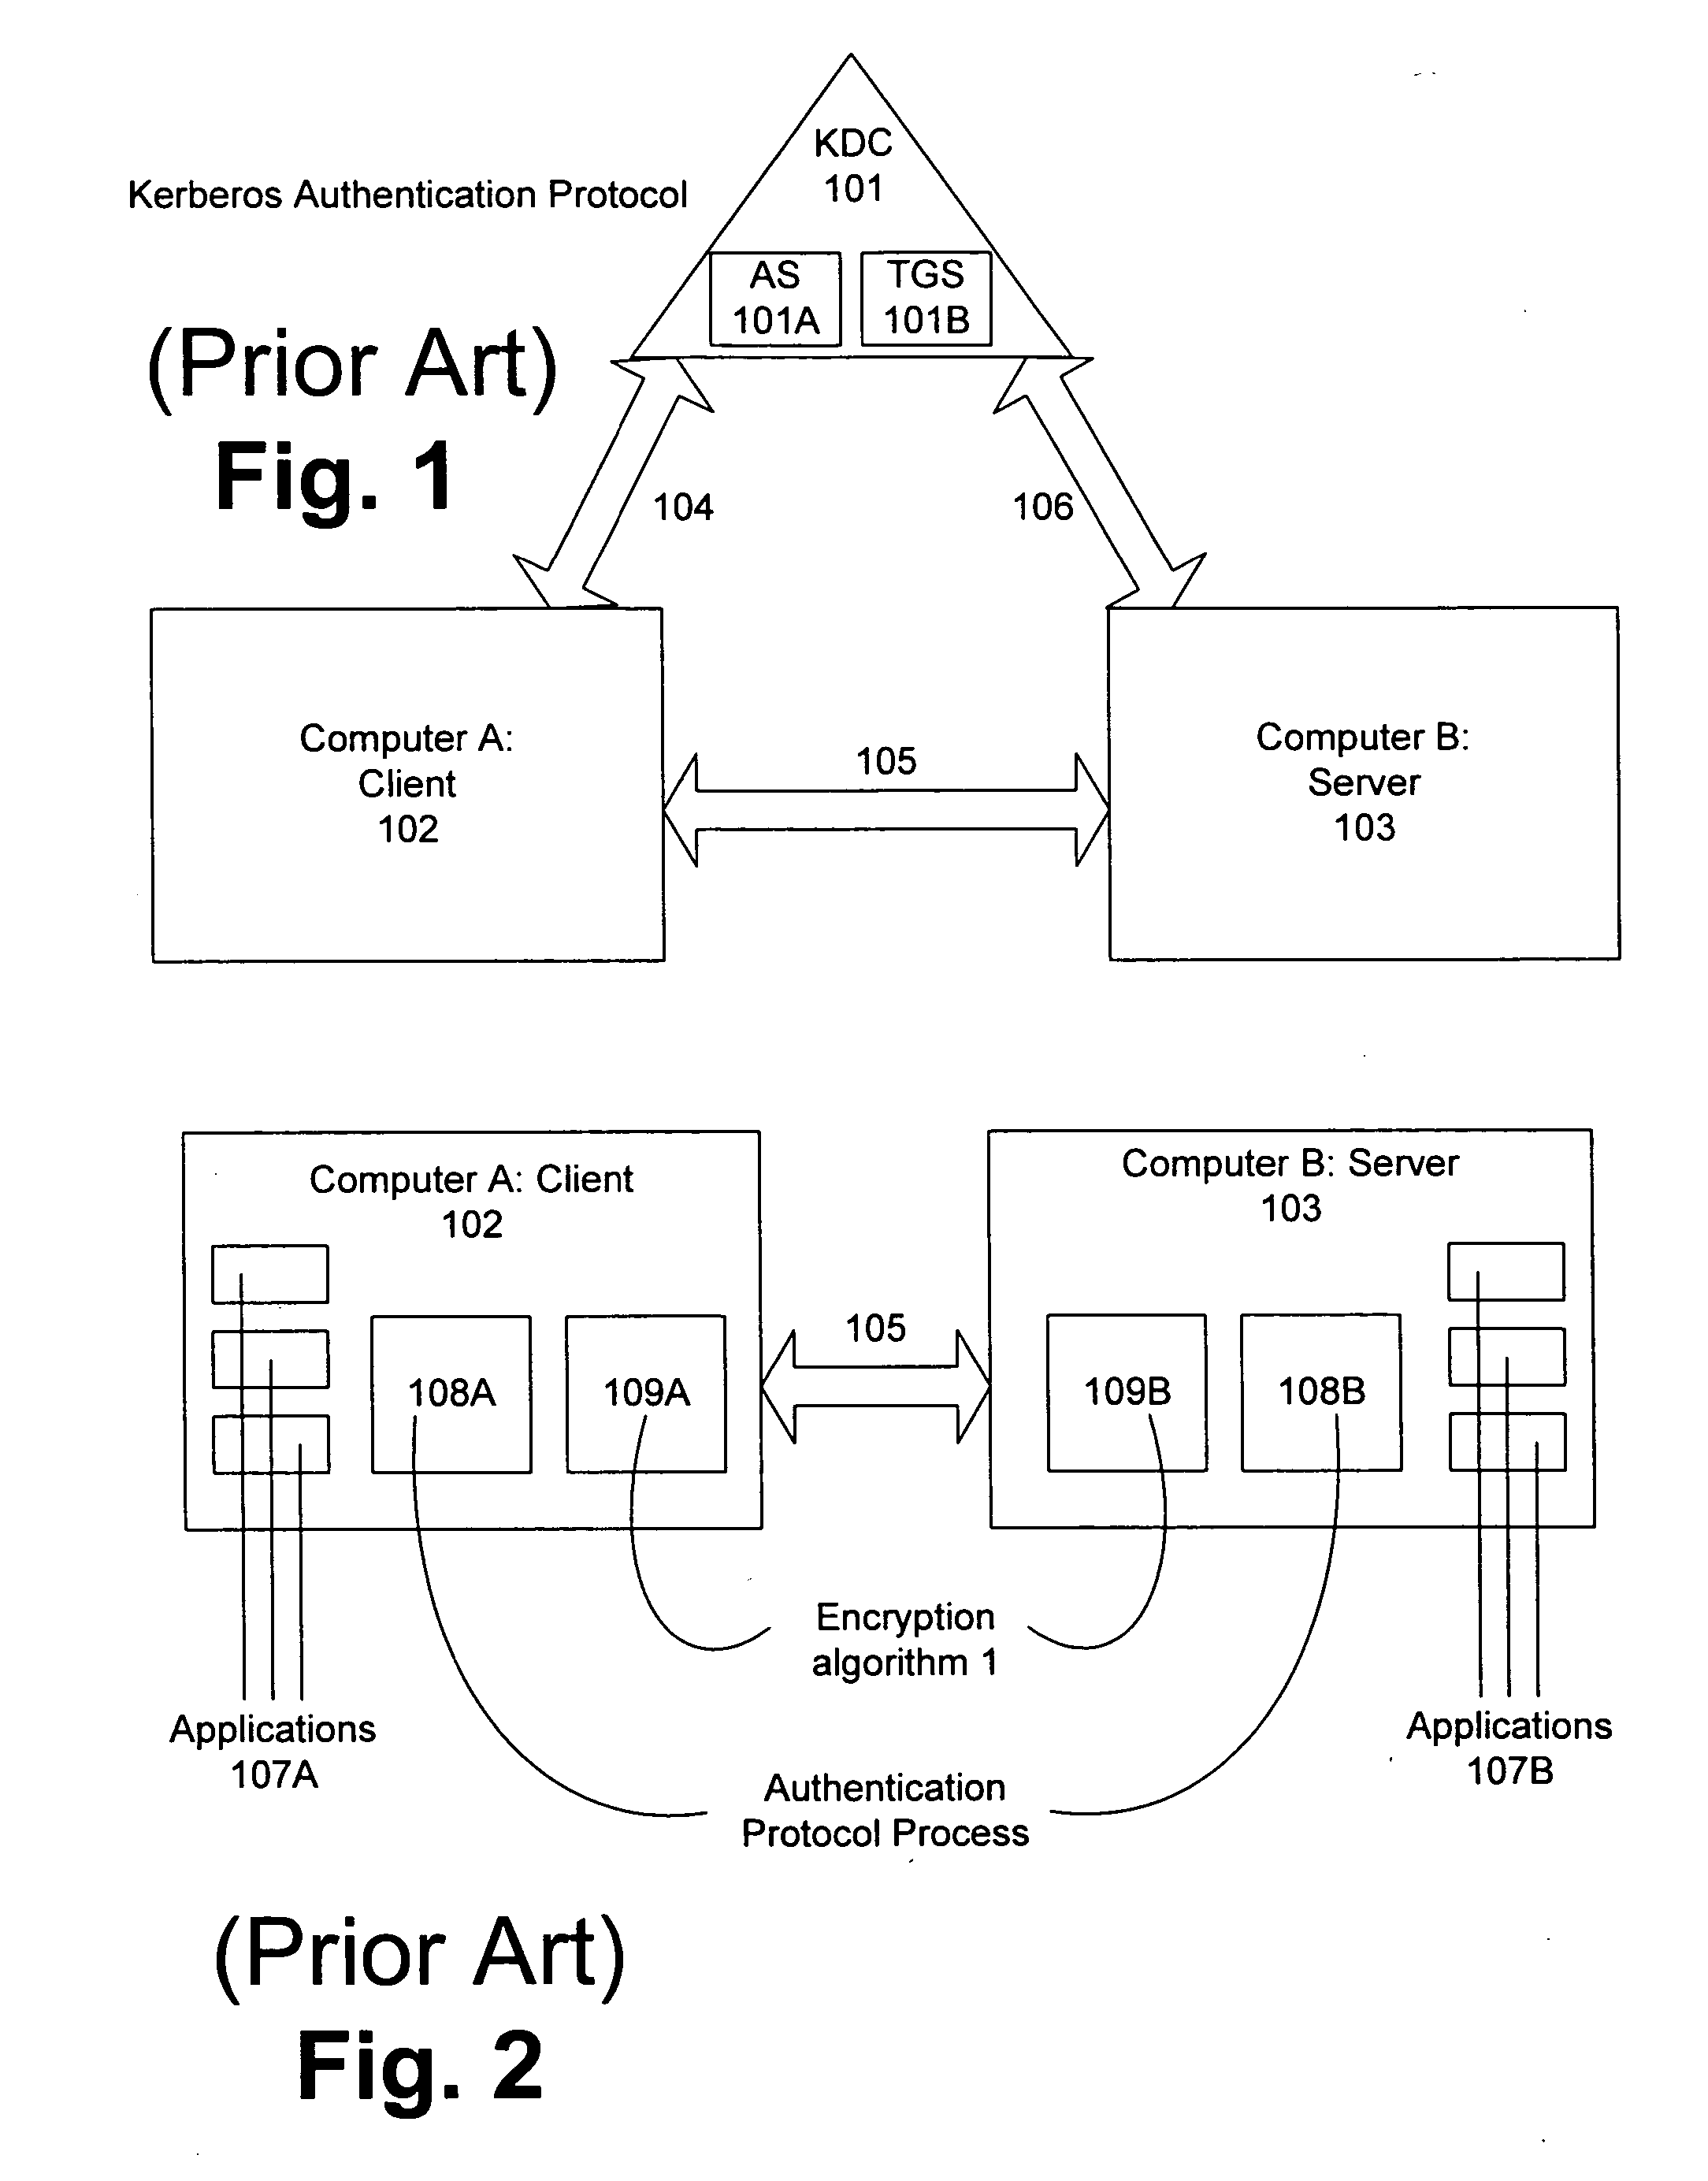 Scheme for sub-realms within an authentication protocol